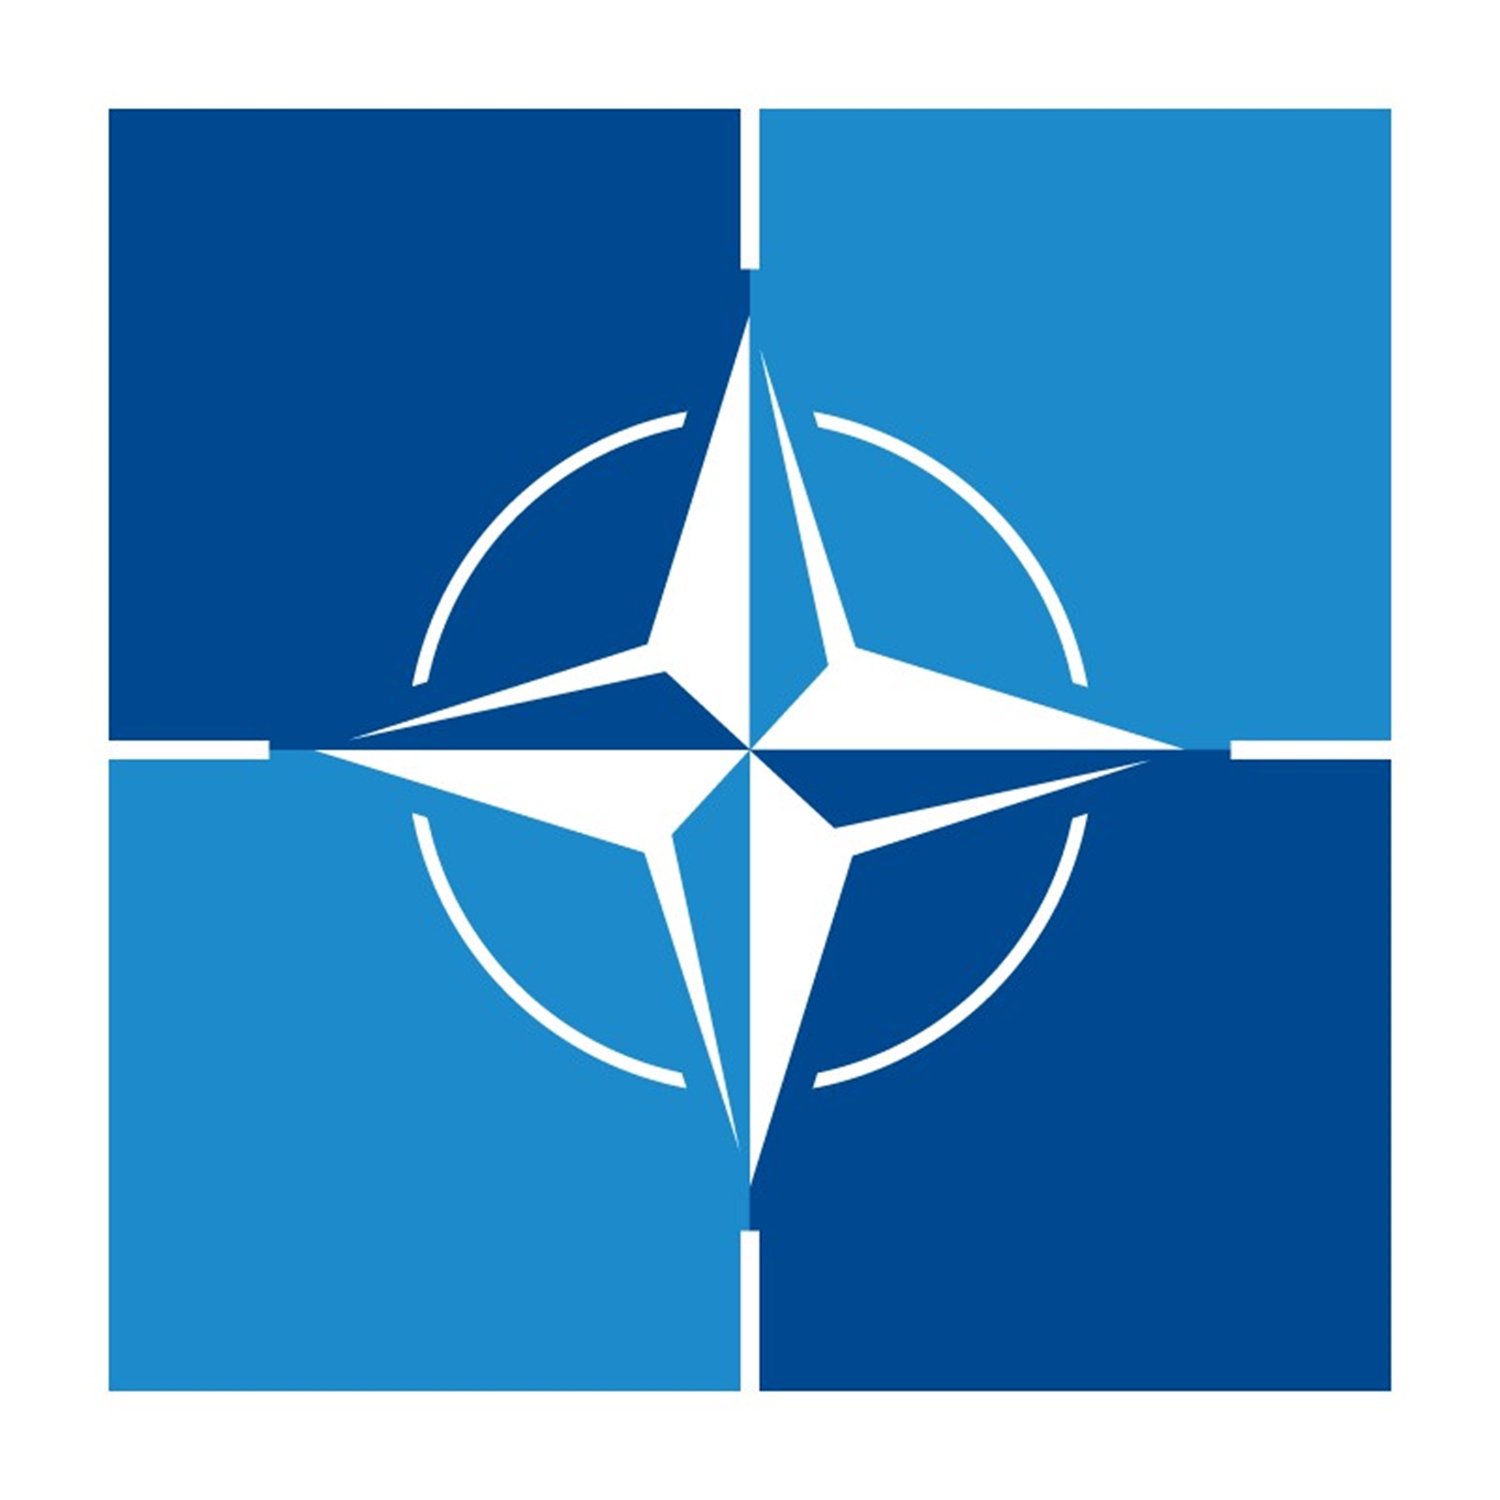 nato logo, 6, 1500x1500 Wallpapers HD / Desktop and Mobile Backgrounds